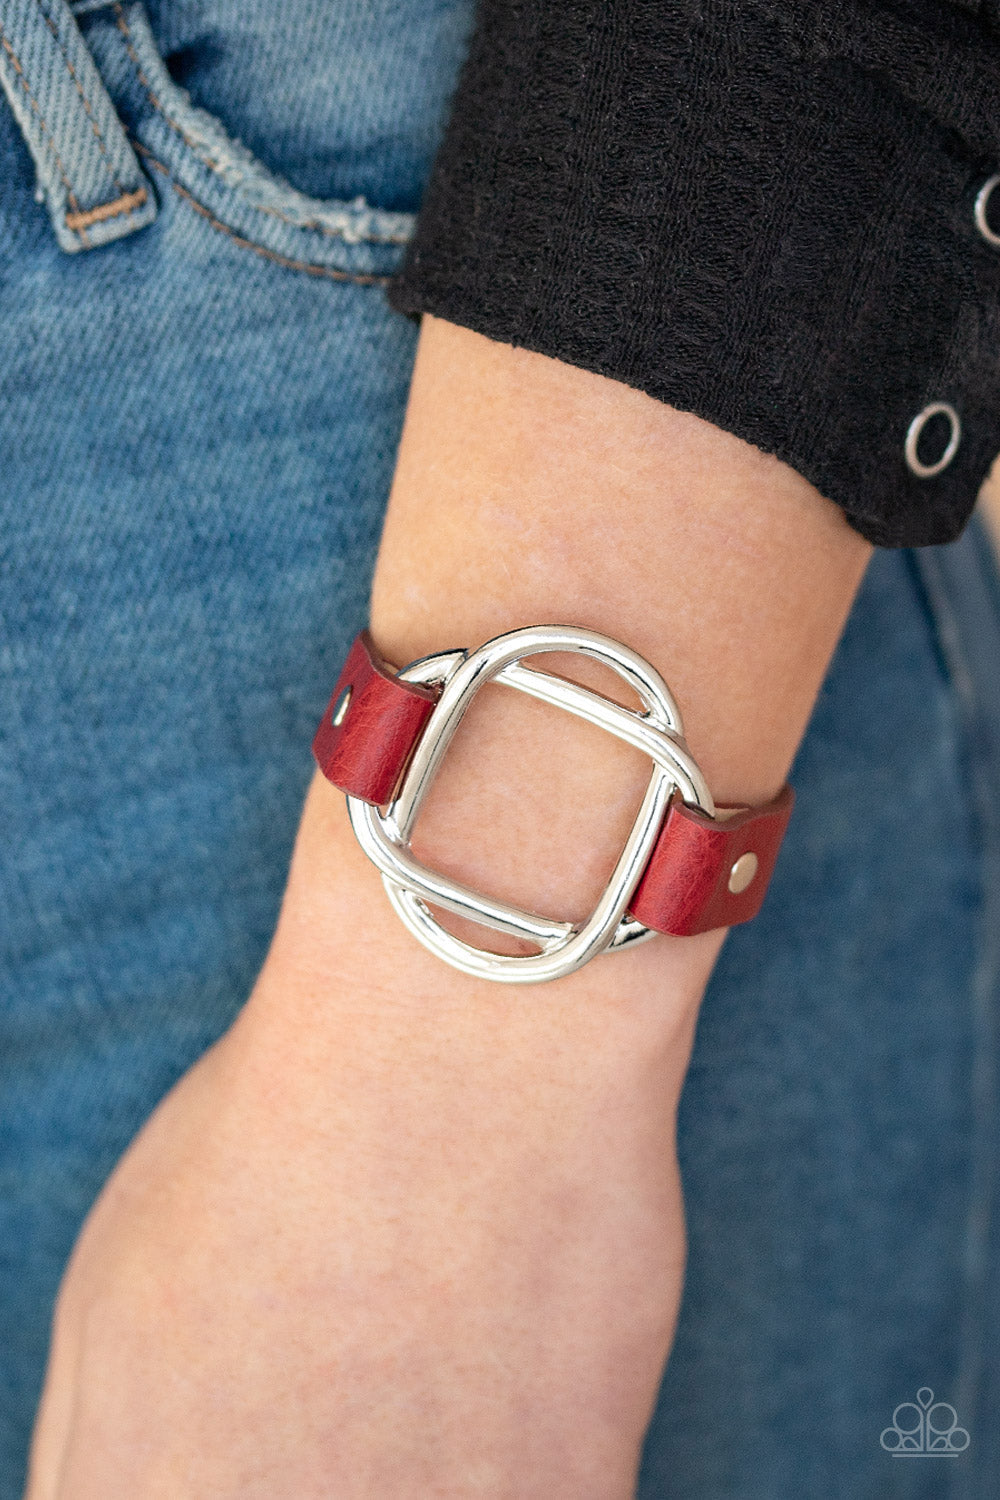 Paparazzi Nautically Knotted - Red - Nautical Silver Knot - Leather Band Bracelet - $5 Jewelry with Ashley Swint